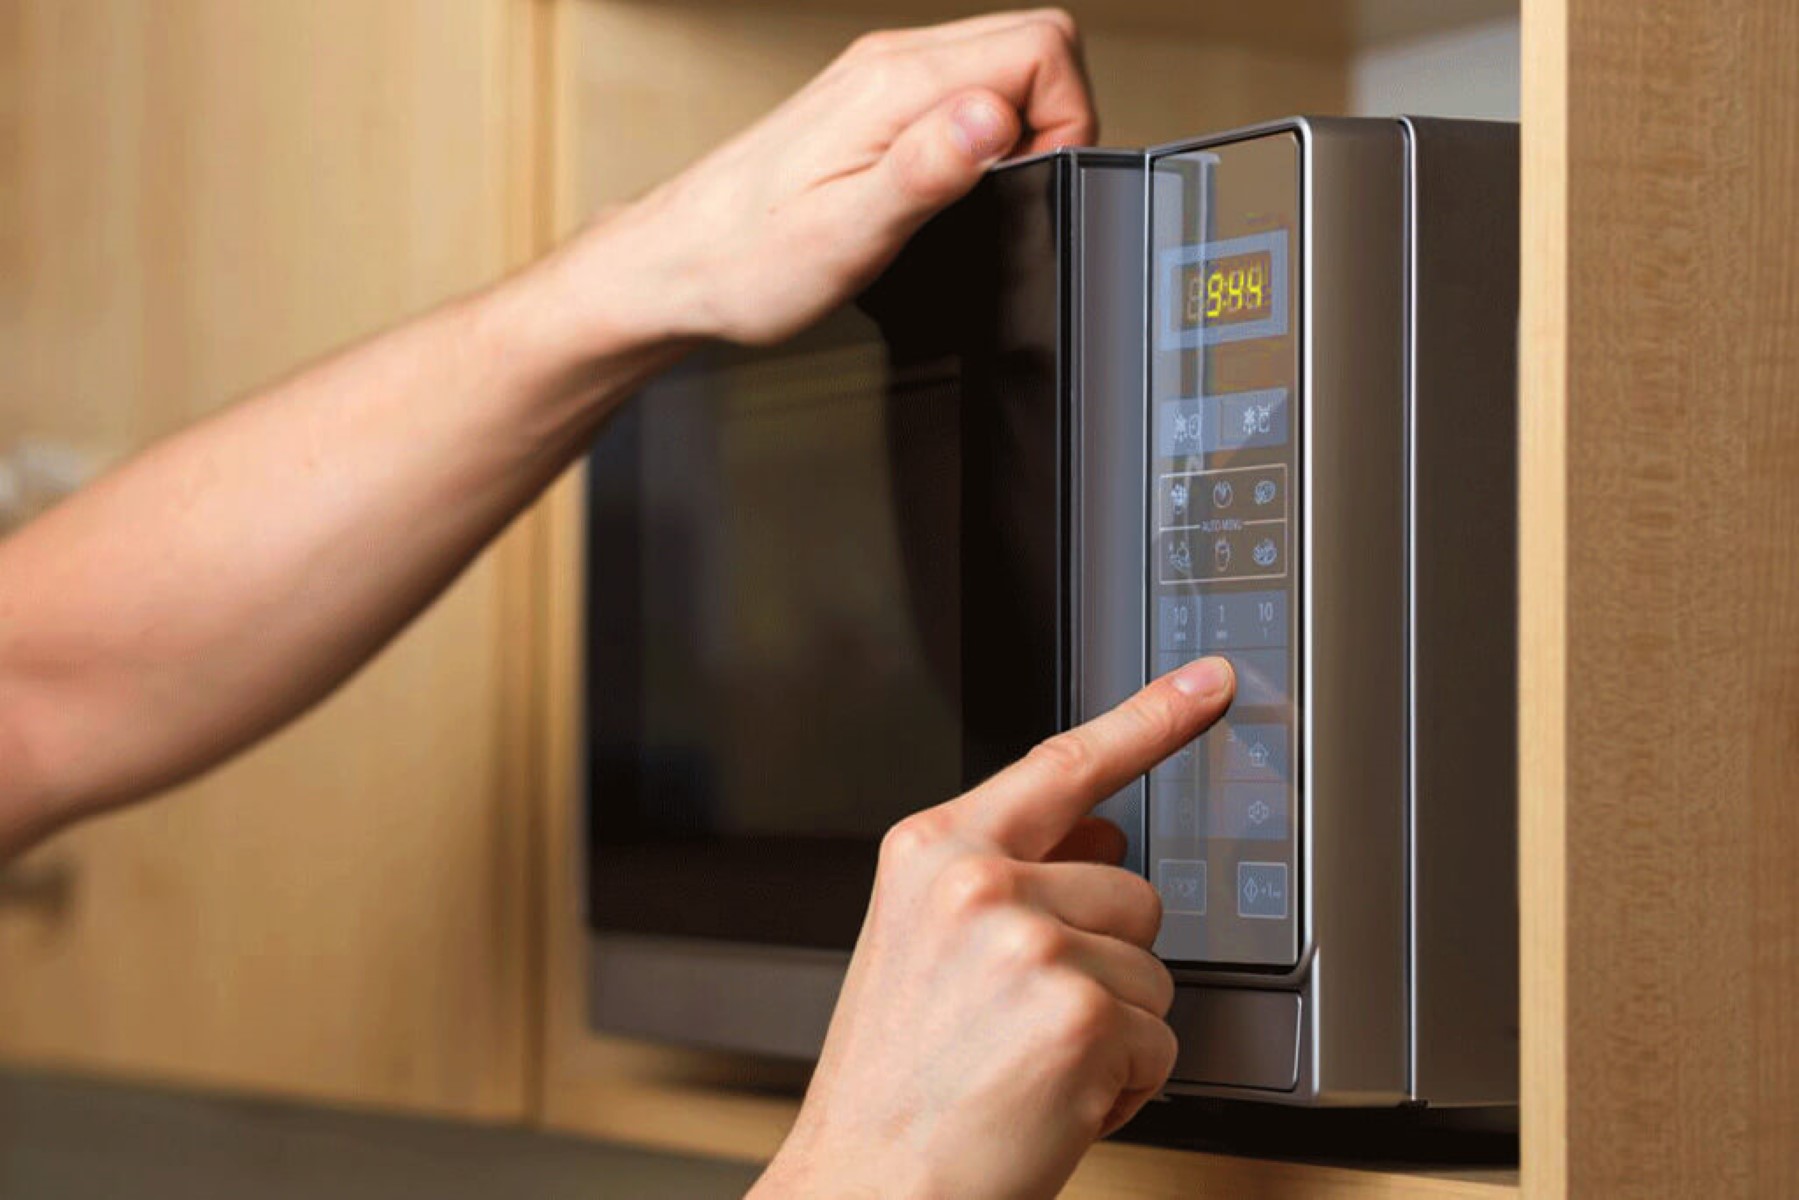 How To Fix The Error Code E-T1 For Samsung Microwave